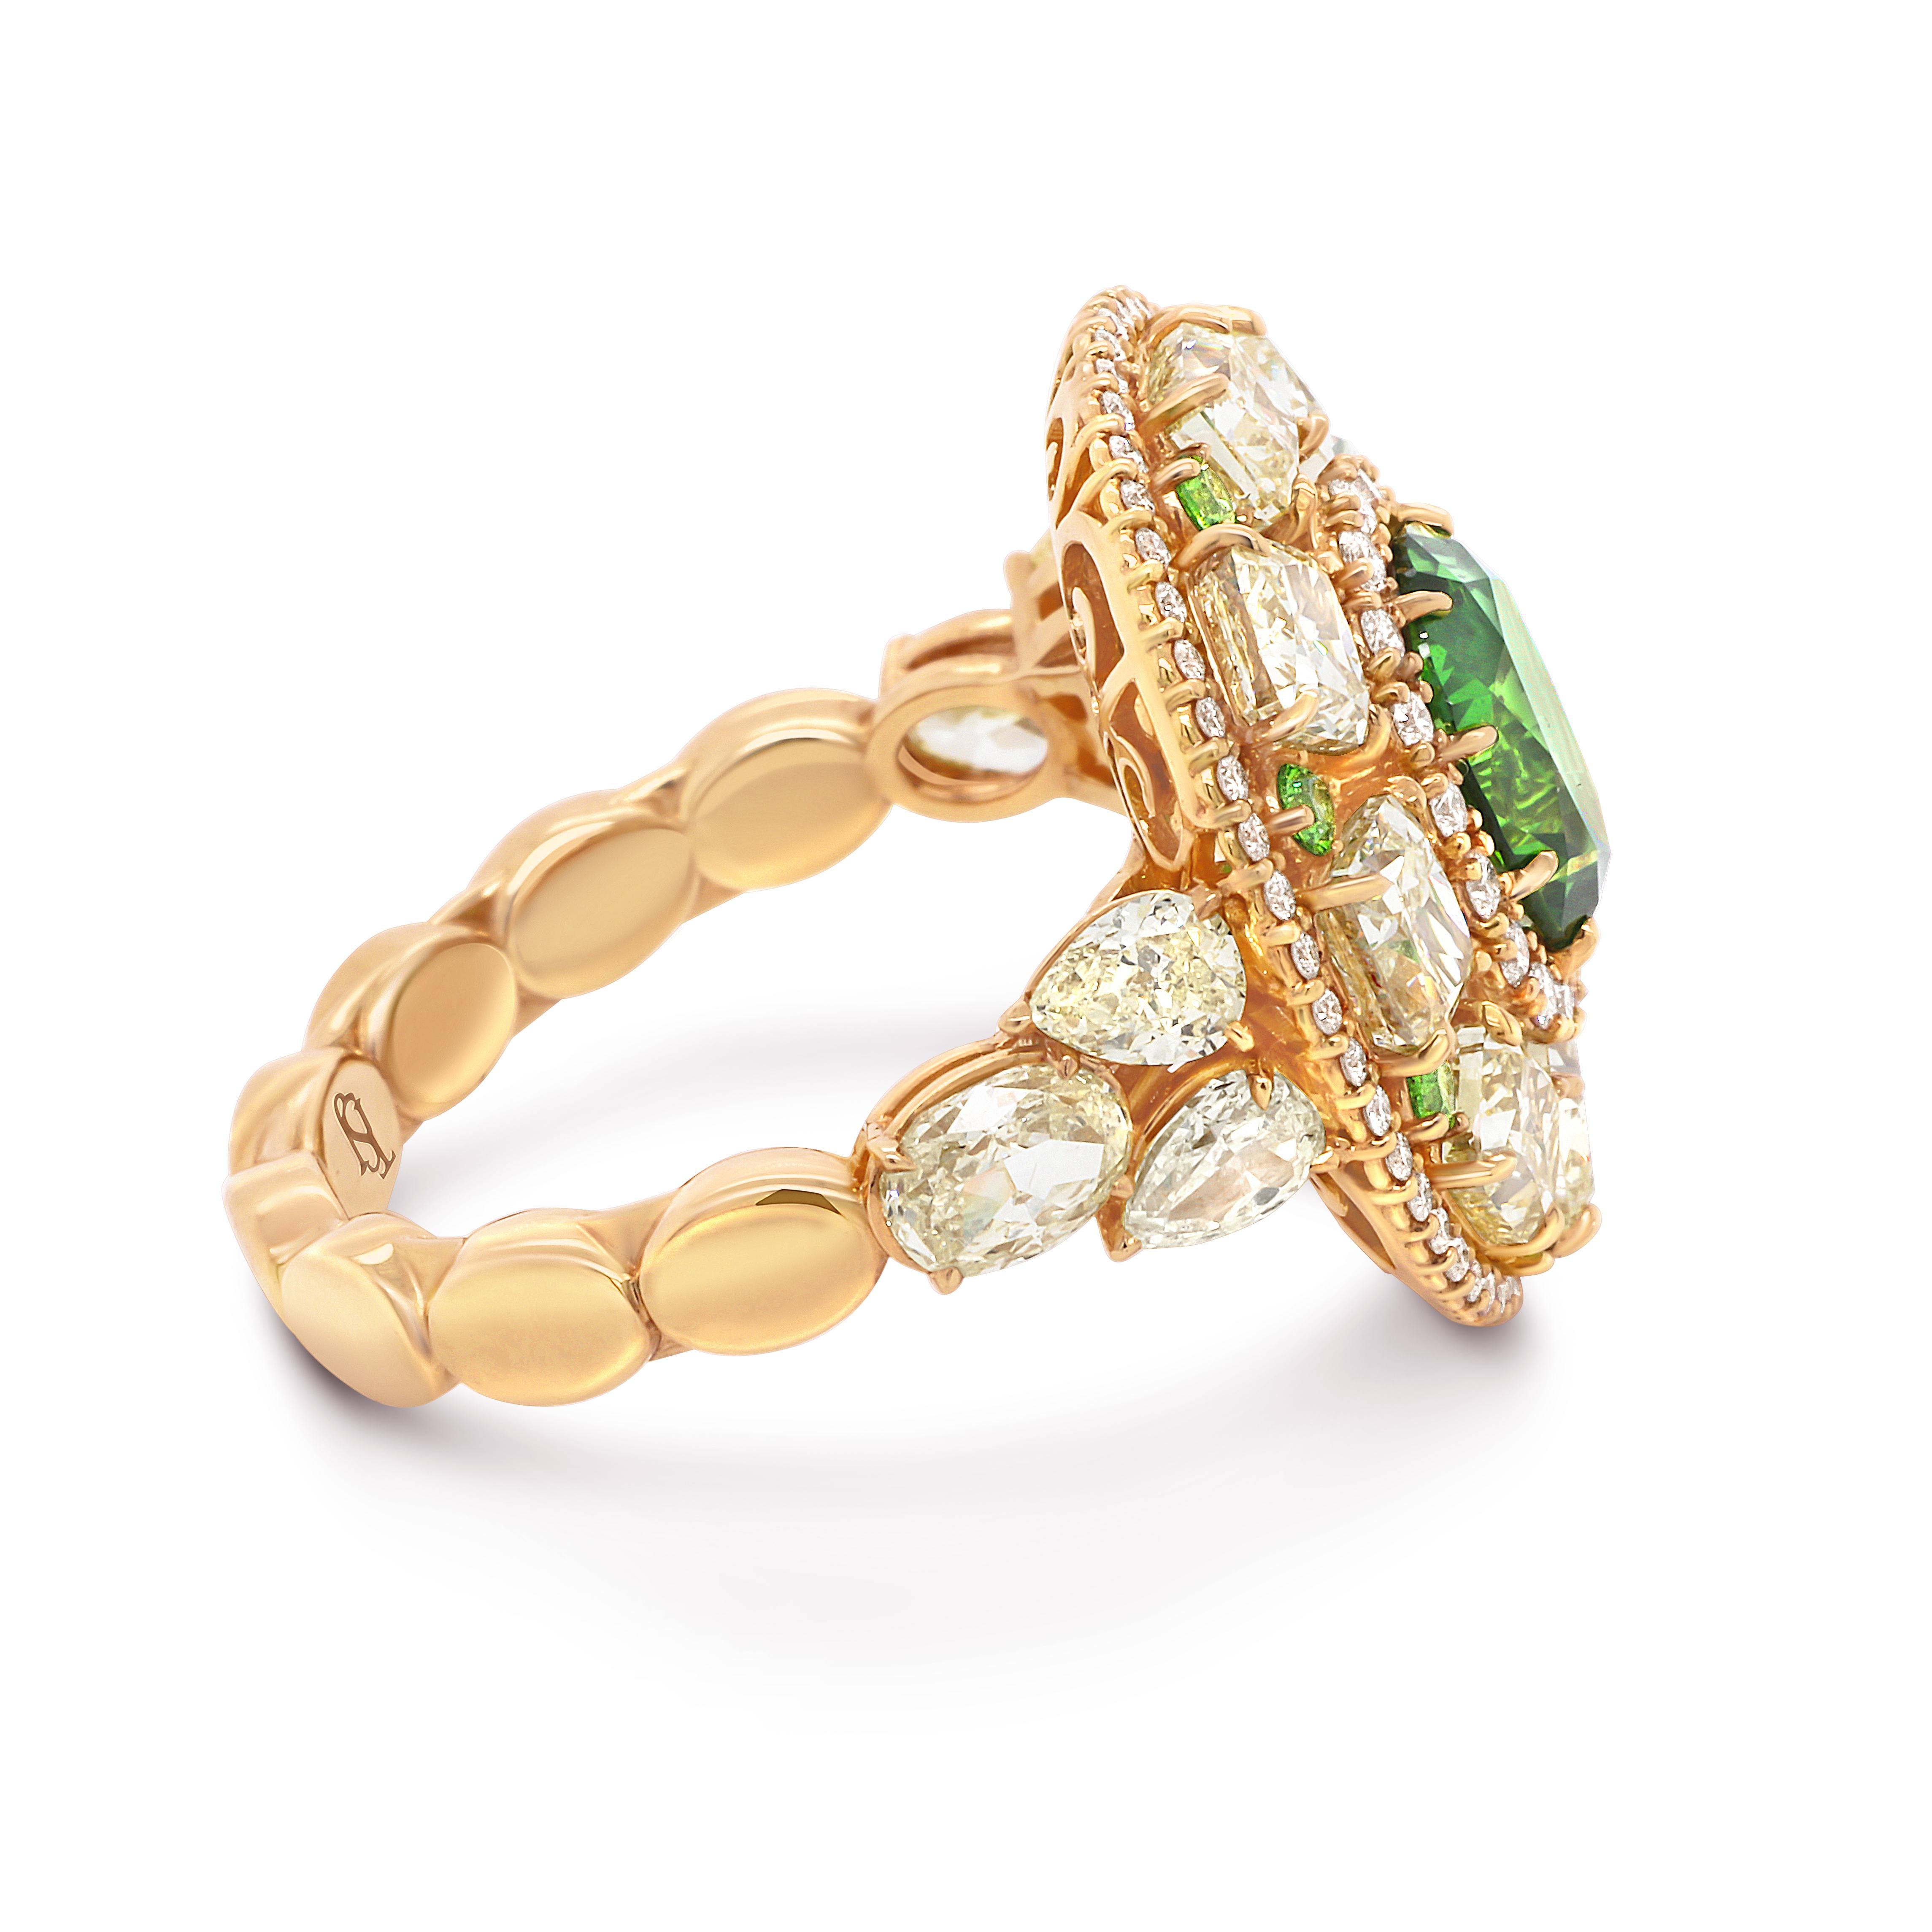 It's an exquisite 18 KT Yellow Gold ring. Center stone is a stunning 1.9 ct GRS certified Russian Demantoid surrounded by Fancy Yellow Diamonds Totaling 4.5 Carats. Total Weight of Colorless Diamonds 0.34 CTW. 
A real masterpiece!

Center stone: